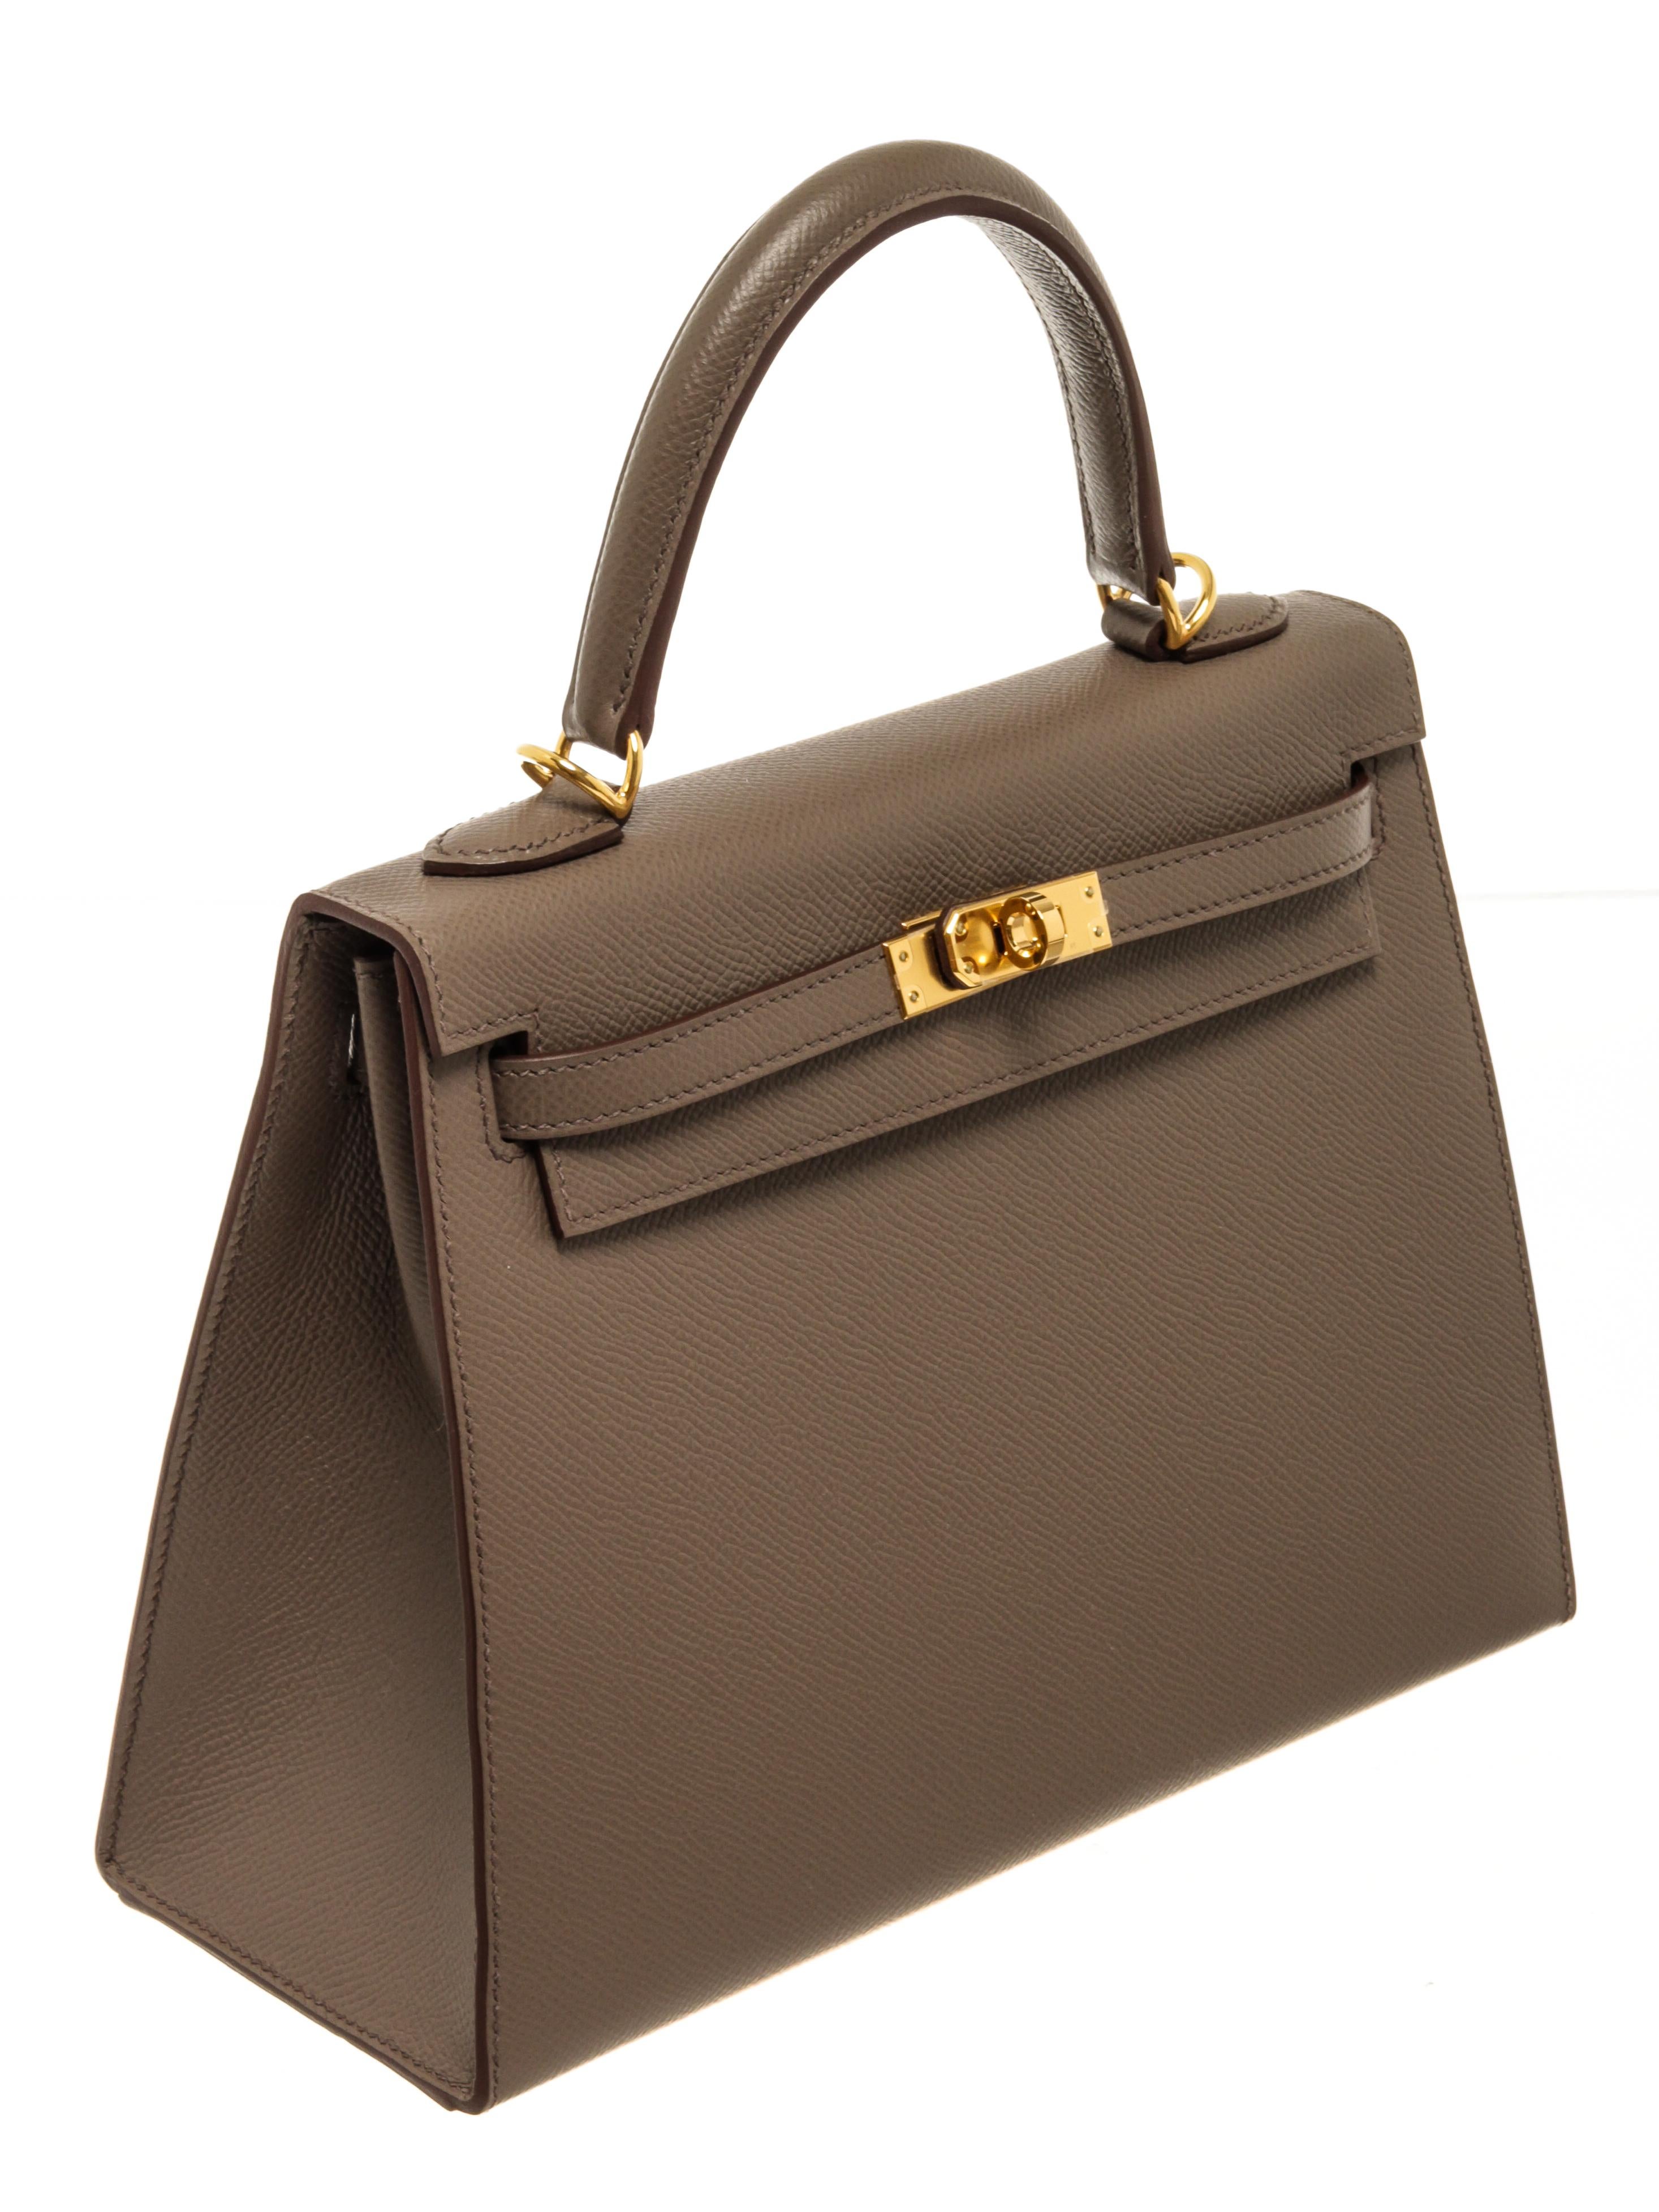 Hermes Kelly 25 cm Etain Leather GHW with turn-lock closure, top handle, leather lining, and one interior zip pocket.

83522MSC